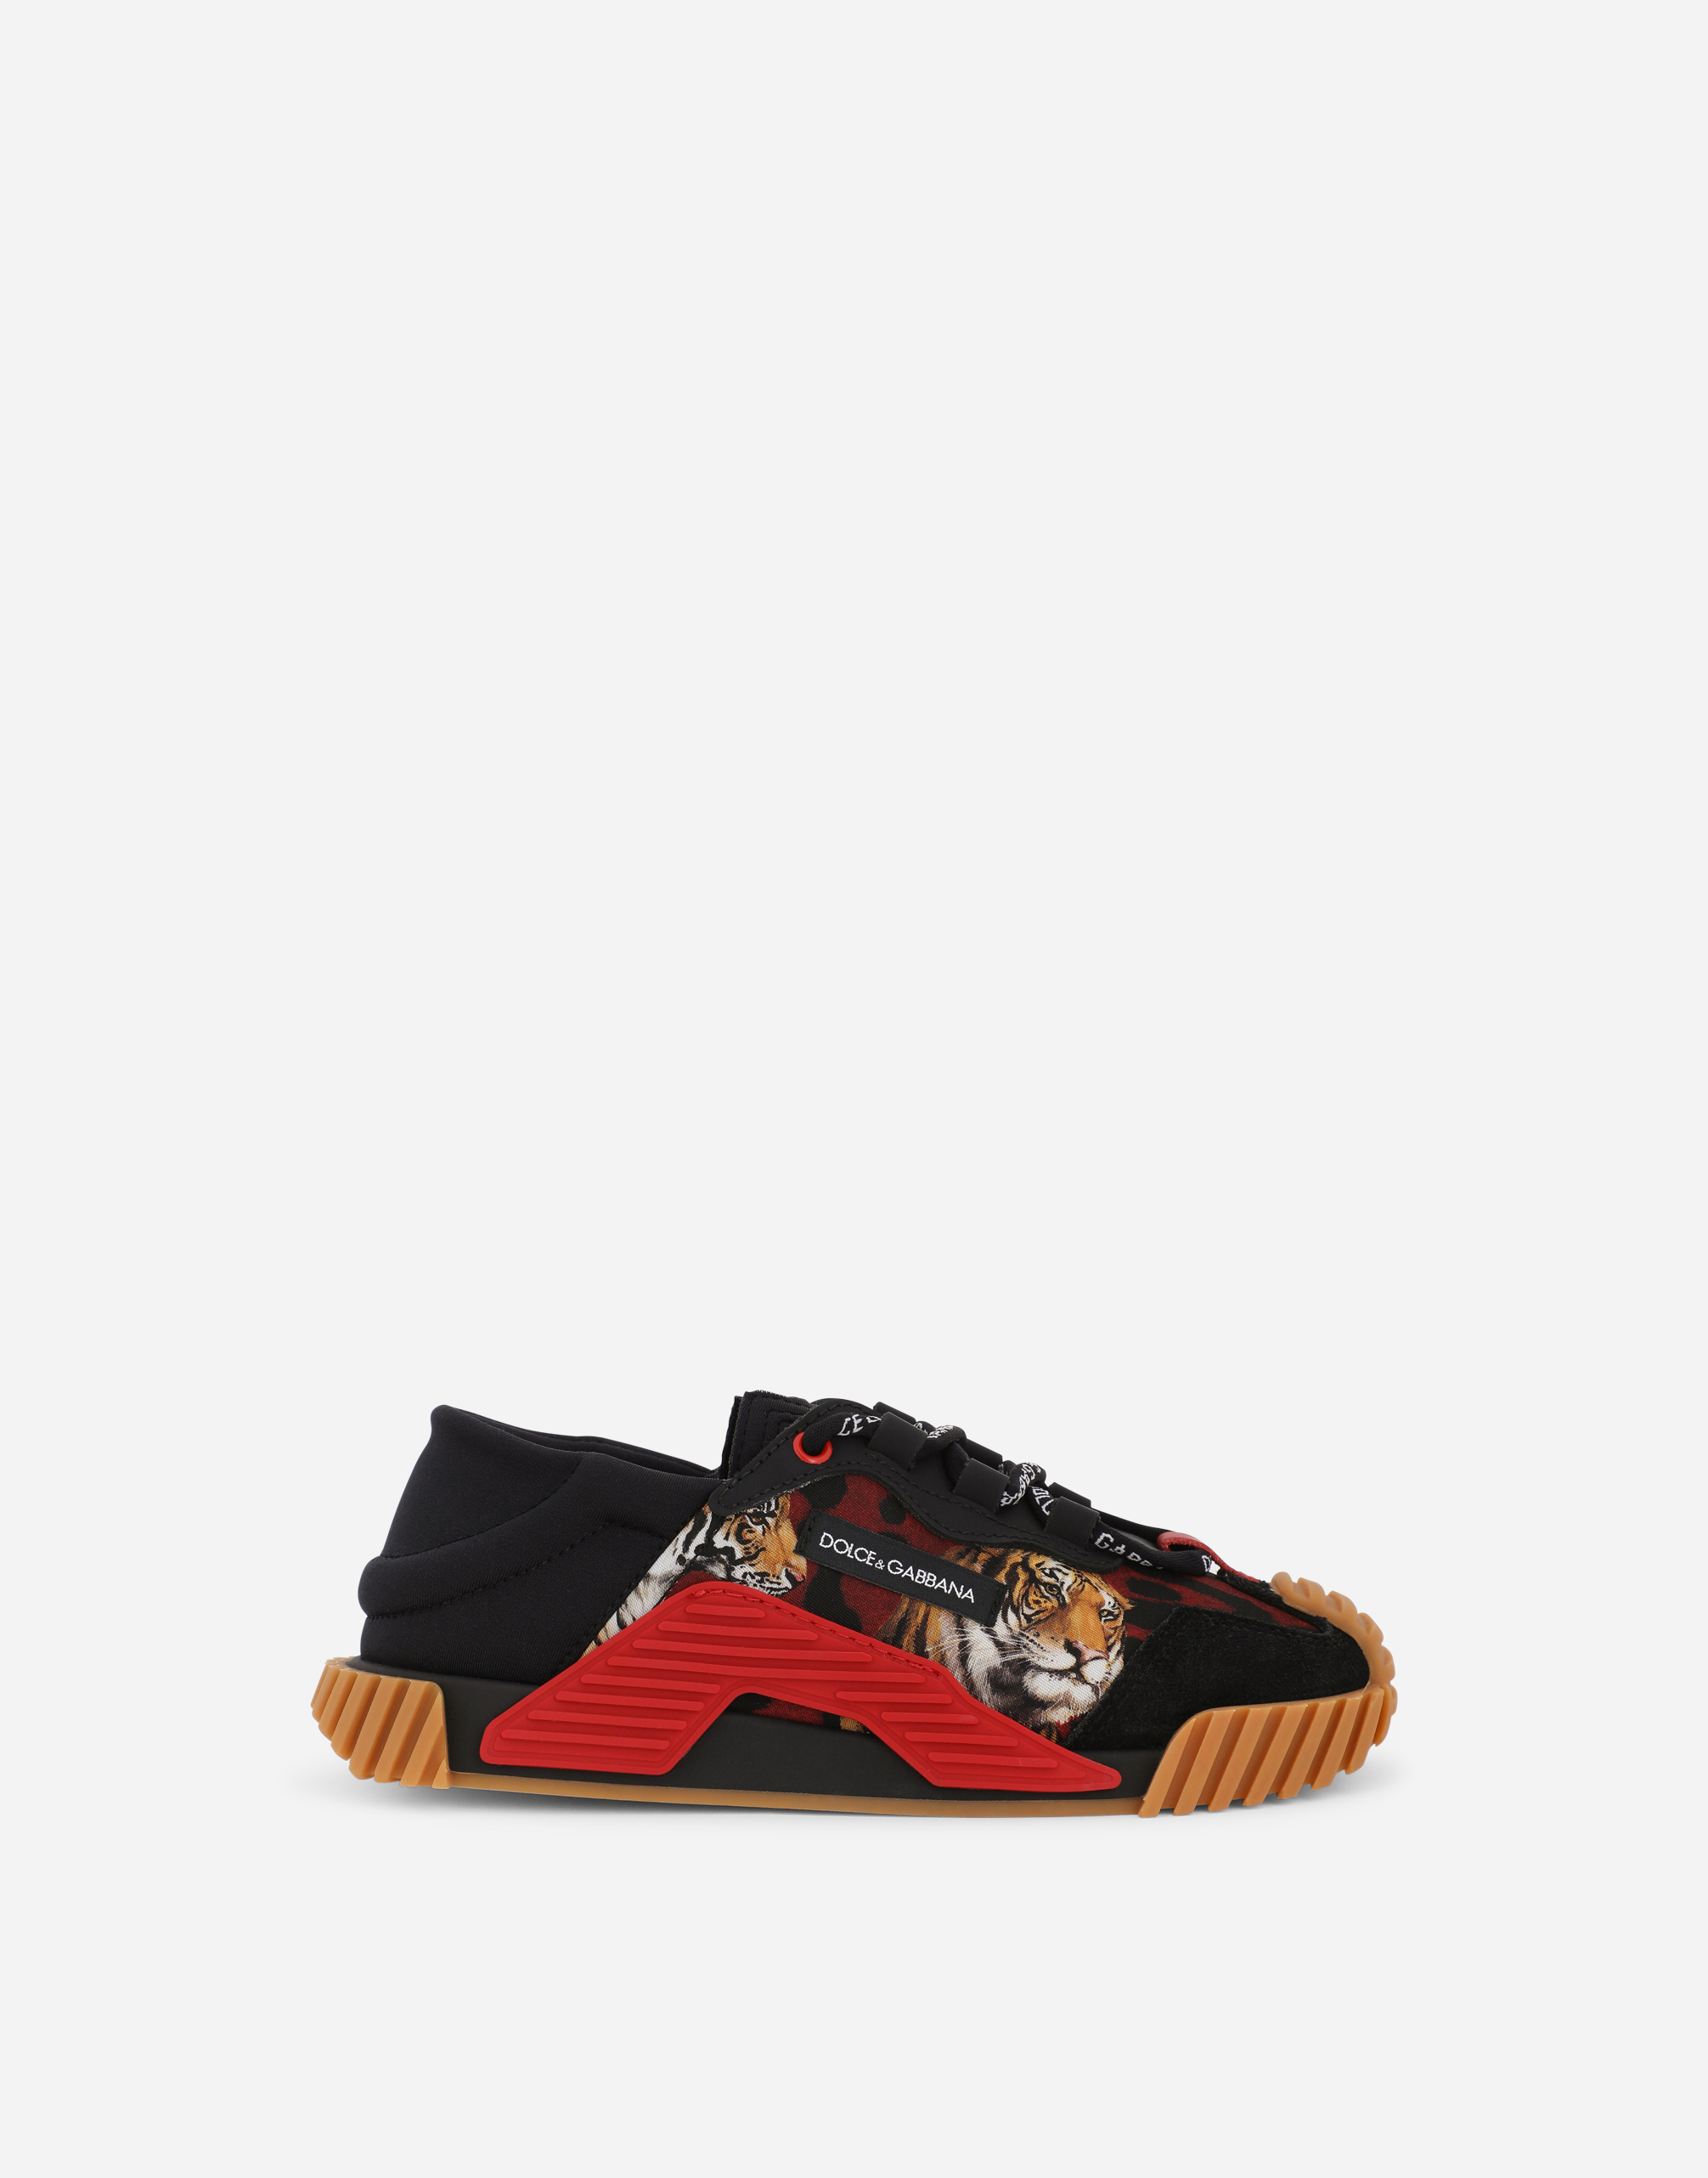 NS1 slip-on sneakers with tiger print in Multicolor